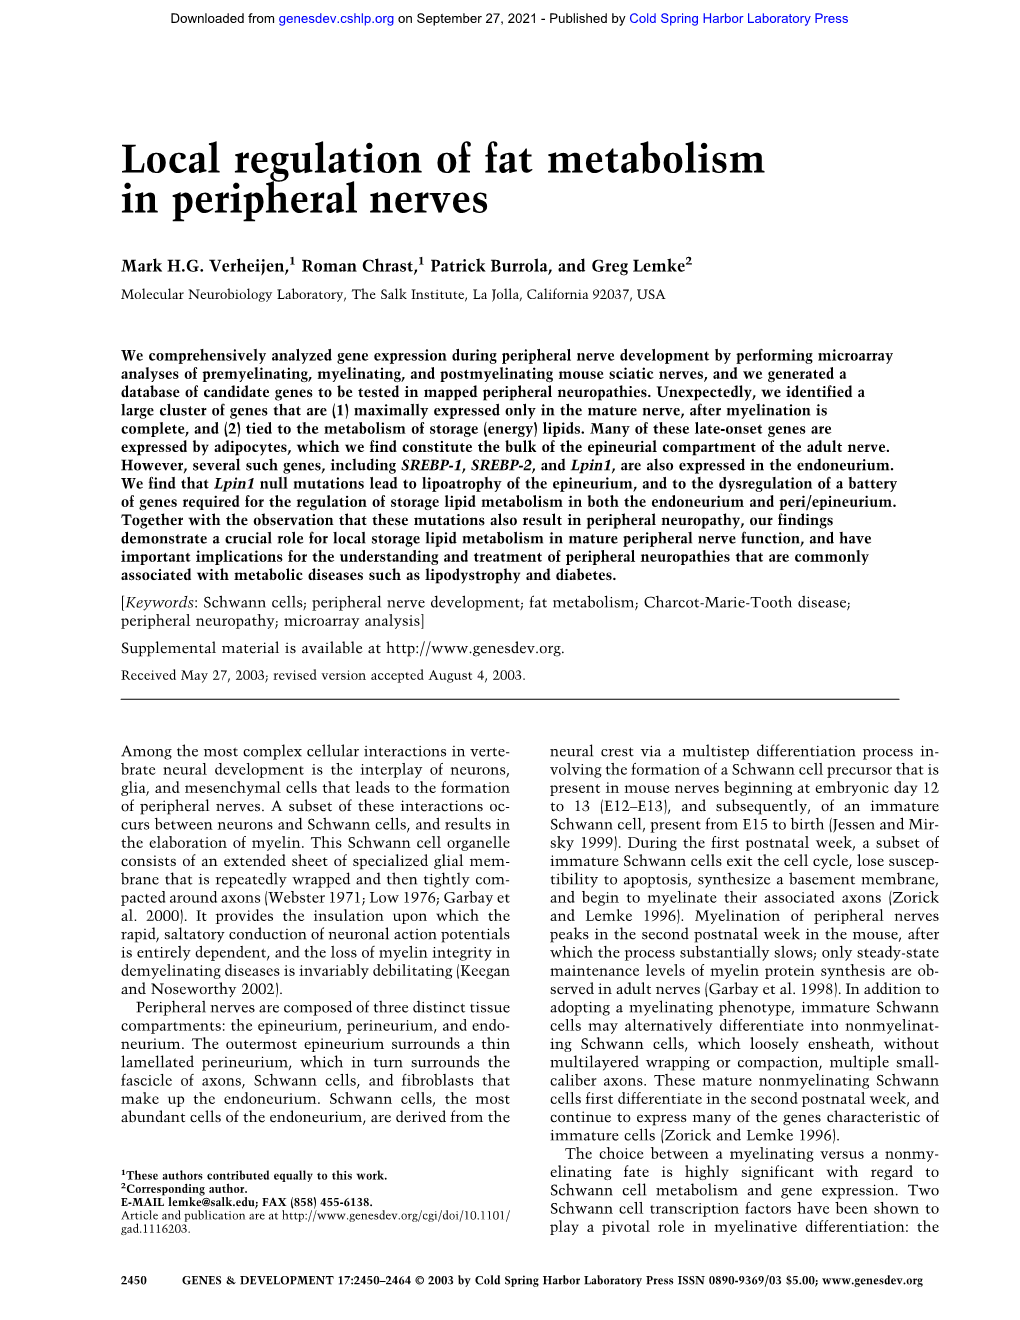 Local Regulation of Fat Metabolism in Peripheral Nerves